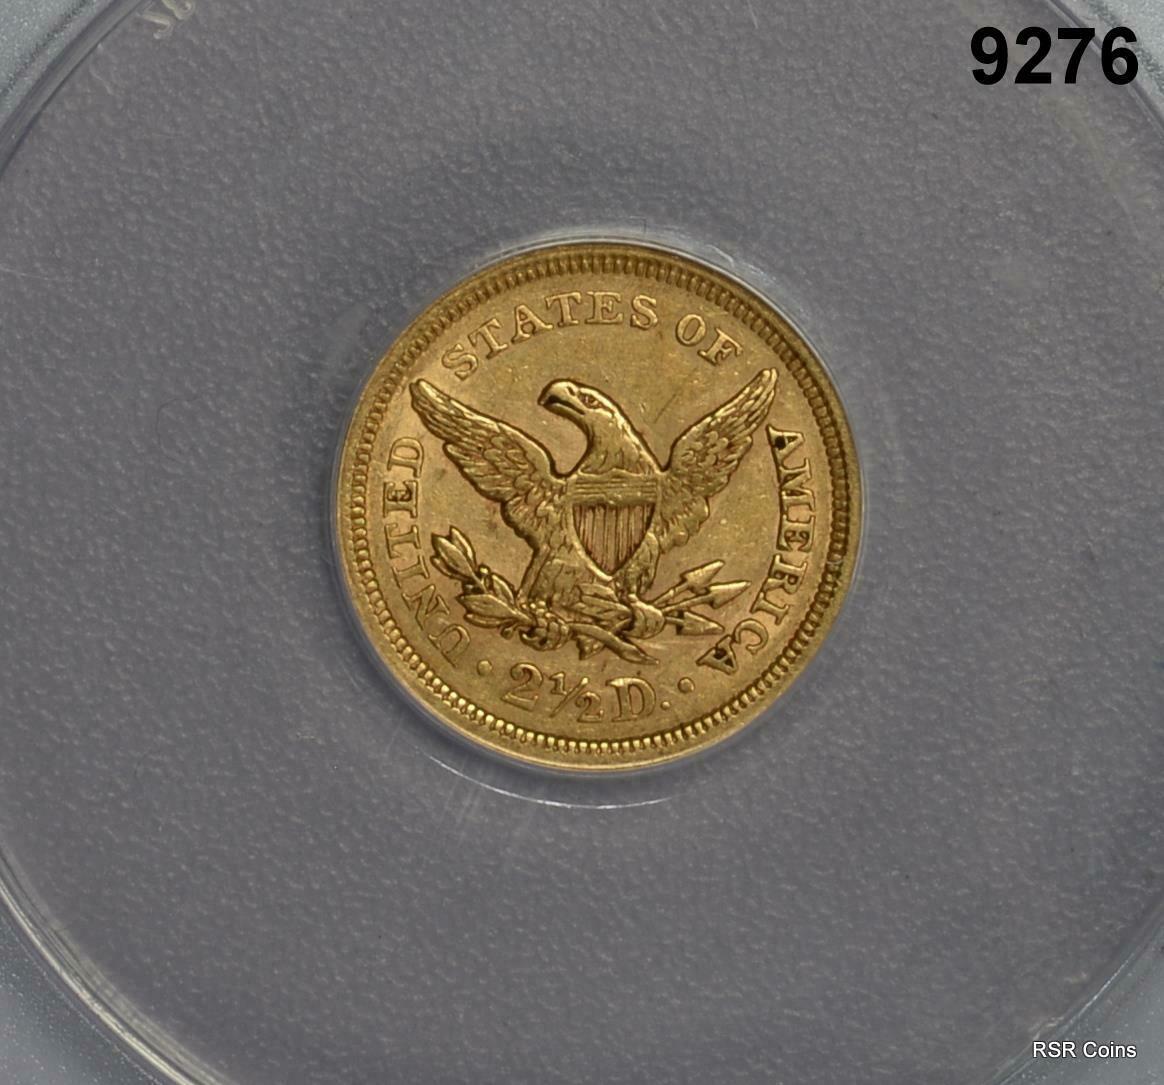 1853 $2.50 GOLD LIBERTY ANACS CERTIFIED AU55 CLEANED #9276